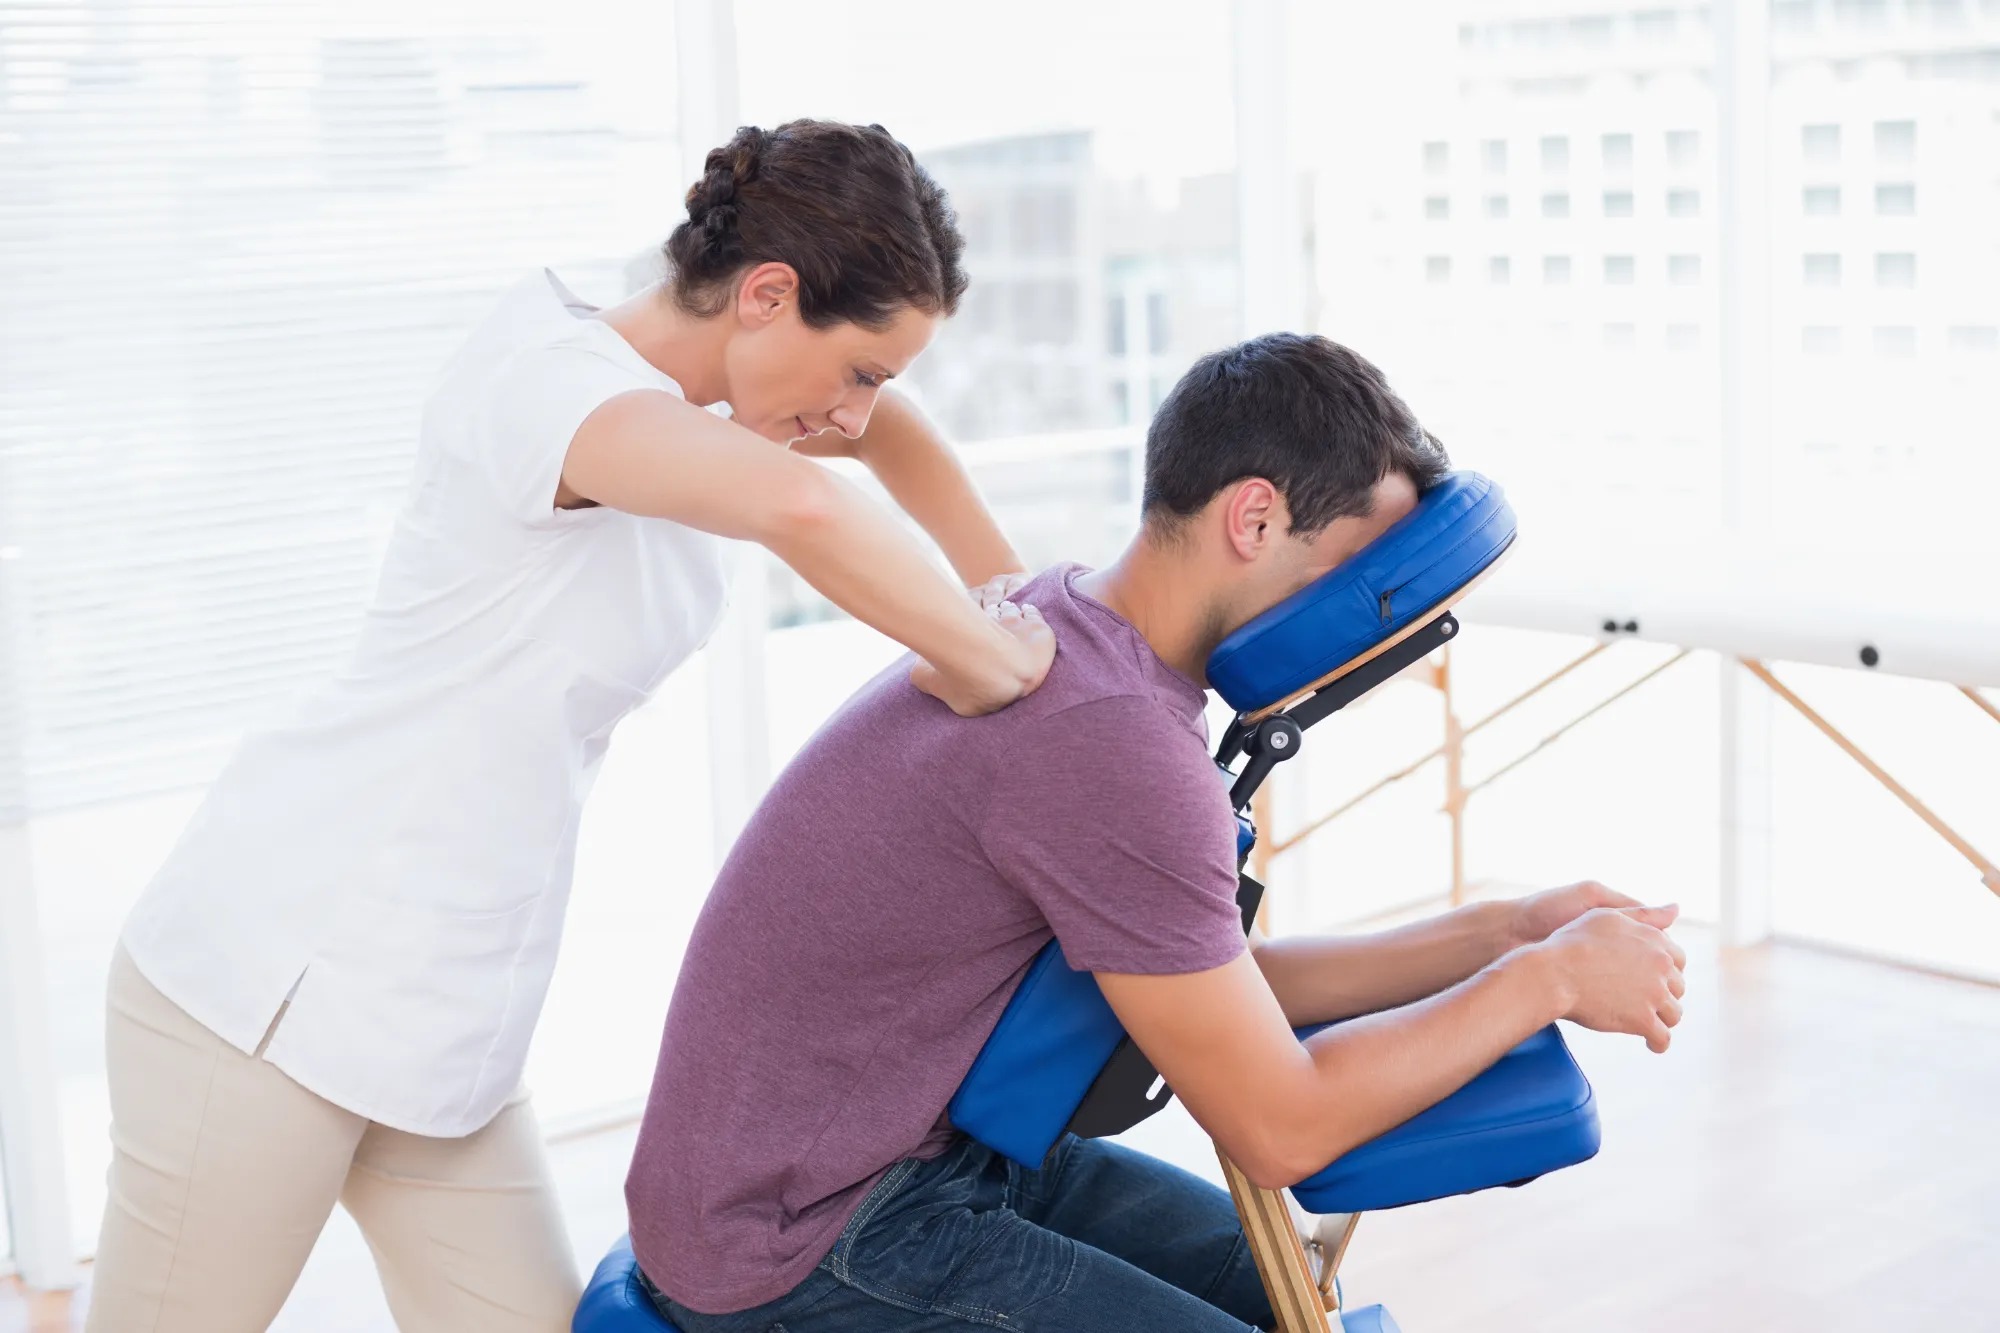 What Insurance Covers Chiropractic Care